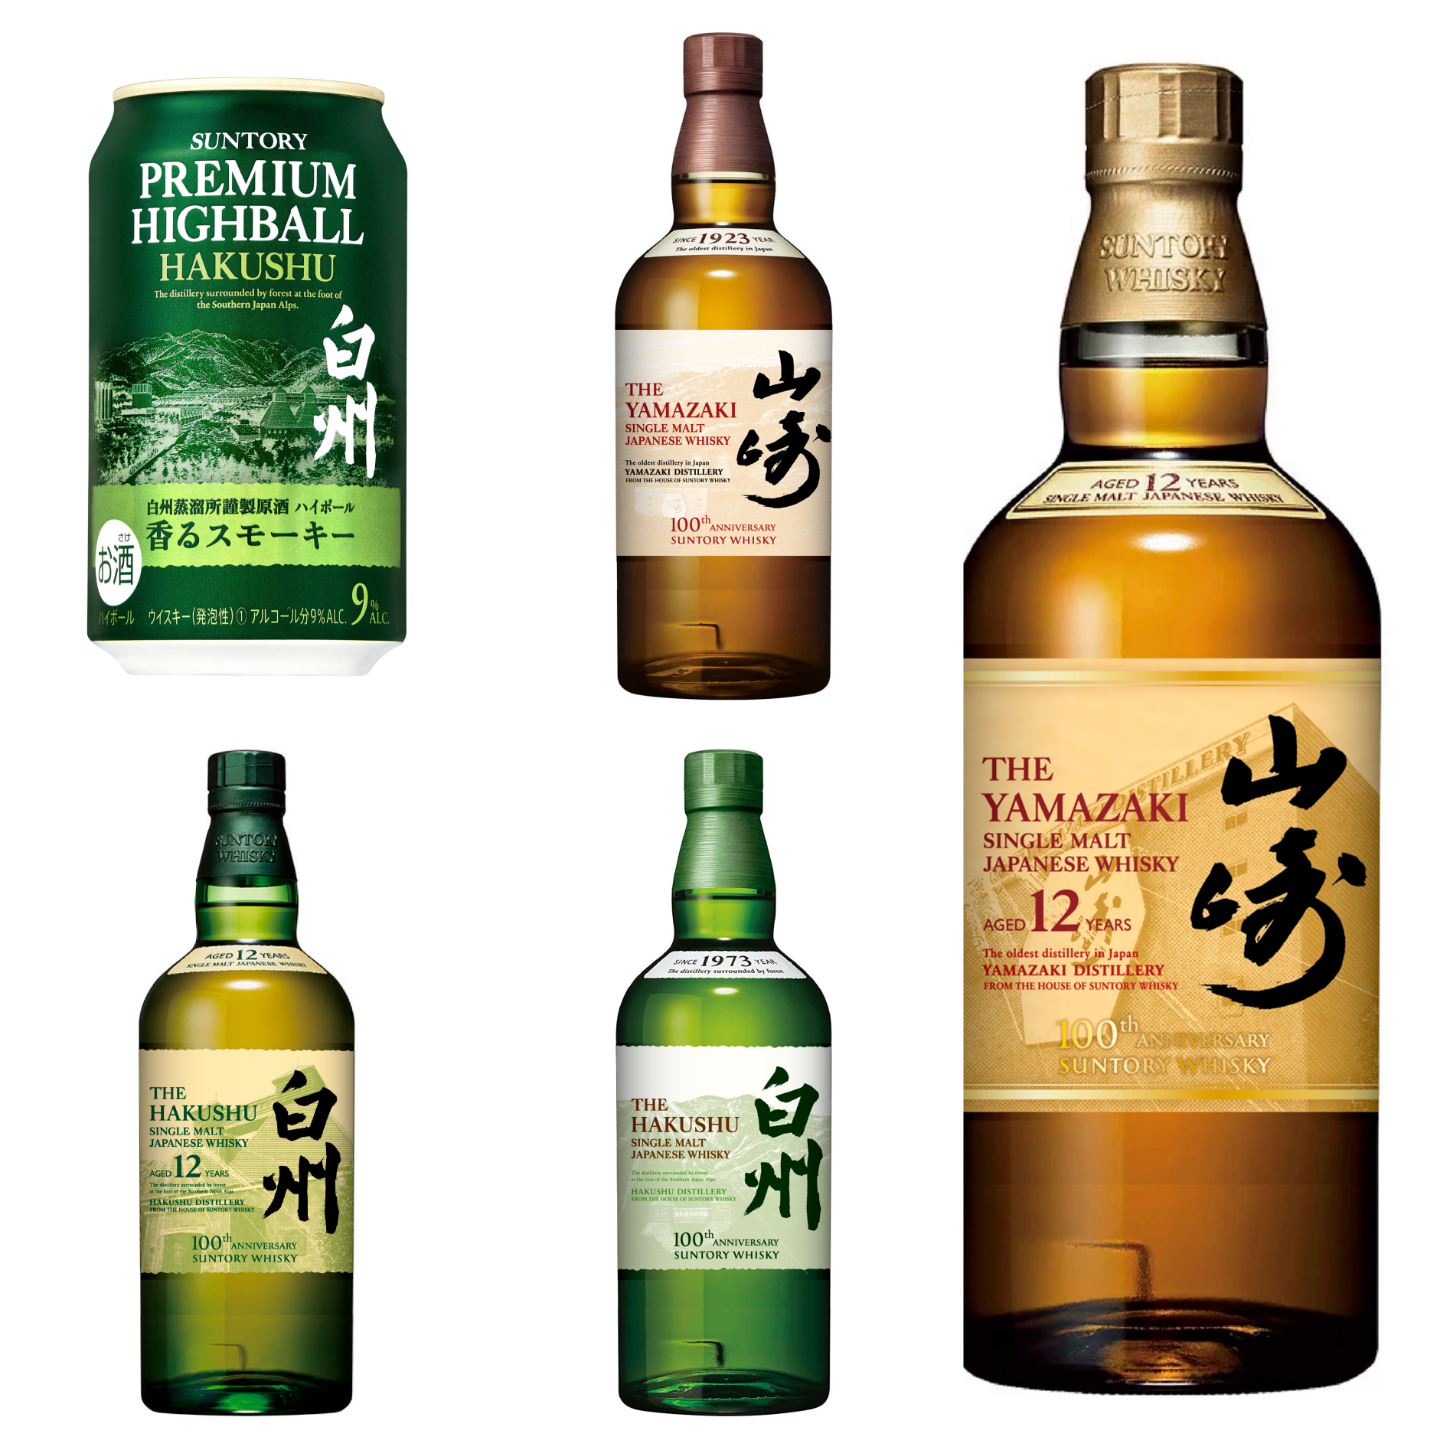 New Products And Distillery Investments To Celebrate Th Anniversary Of Suntory Whisky